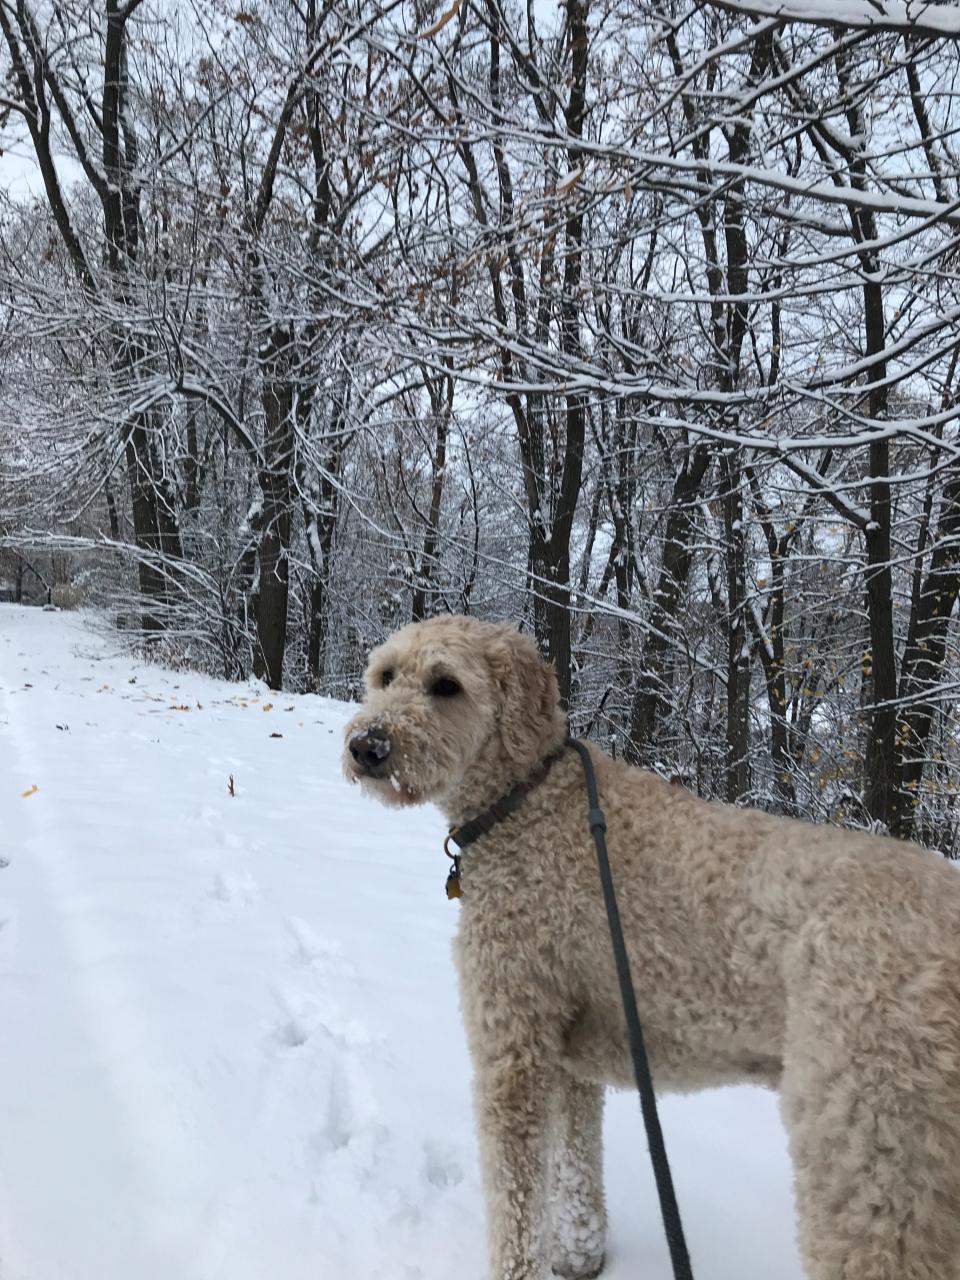 Henry greeted Wausau's first snowstorm with serene acceptance when we went out for a walk Sunday morning.